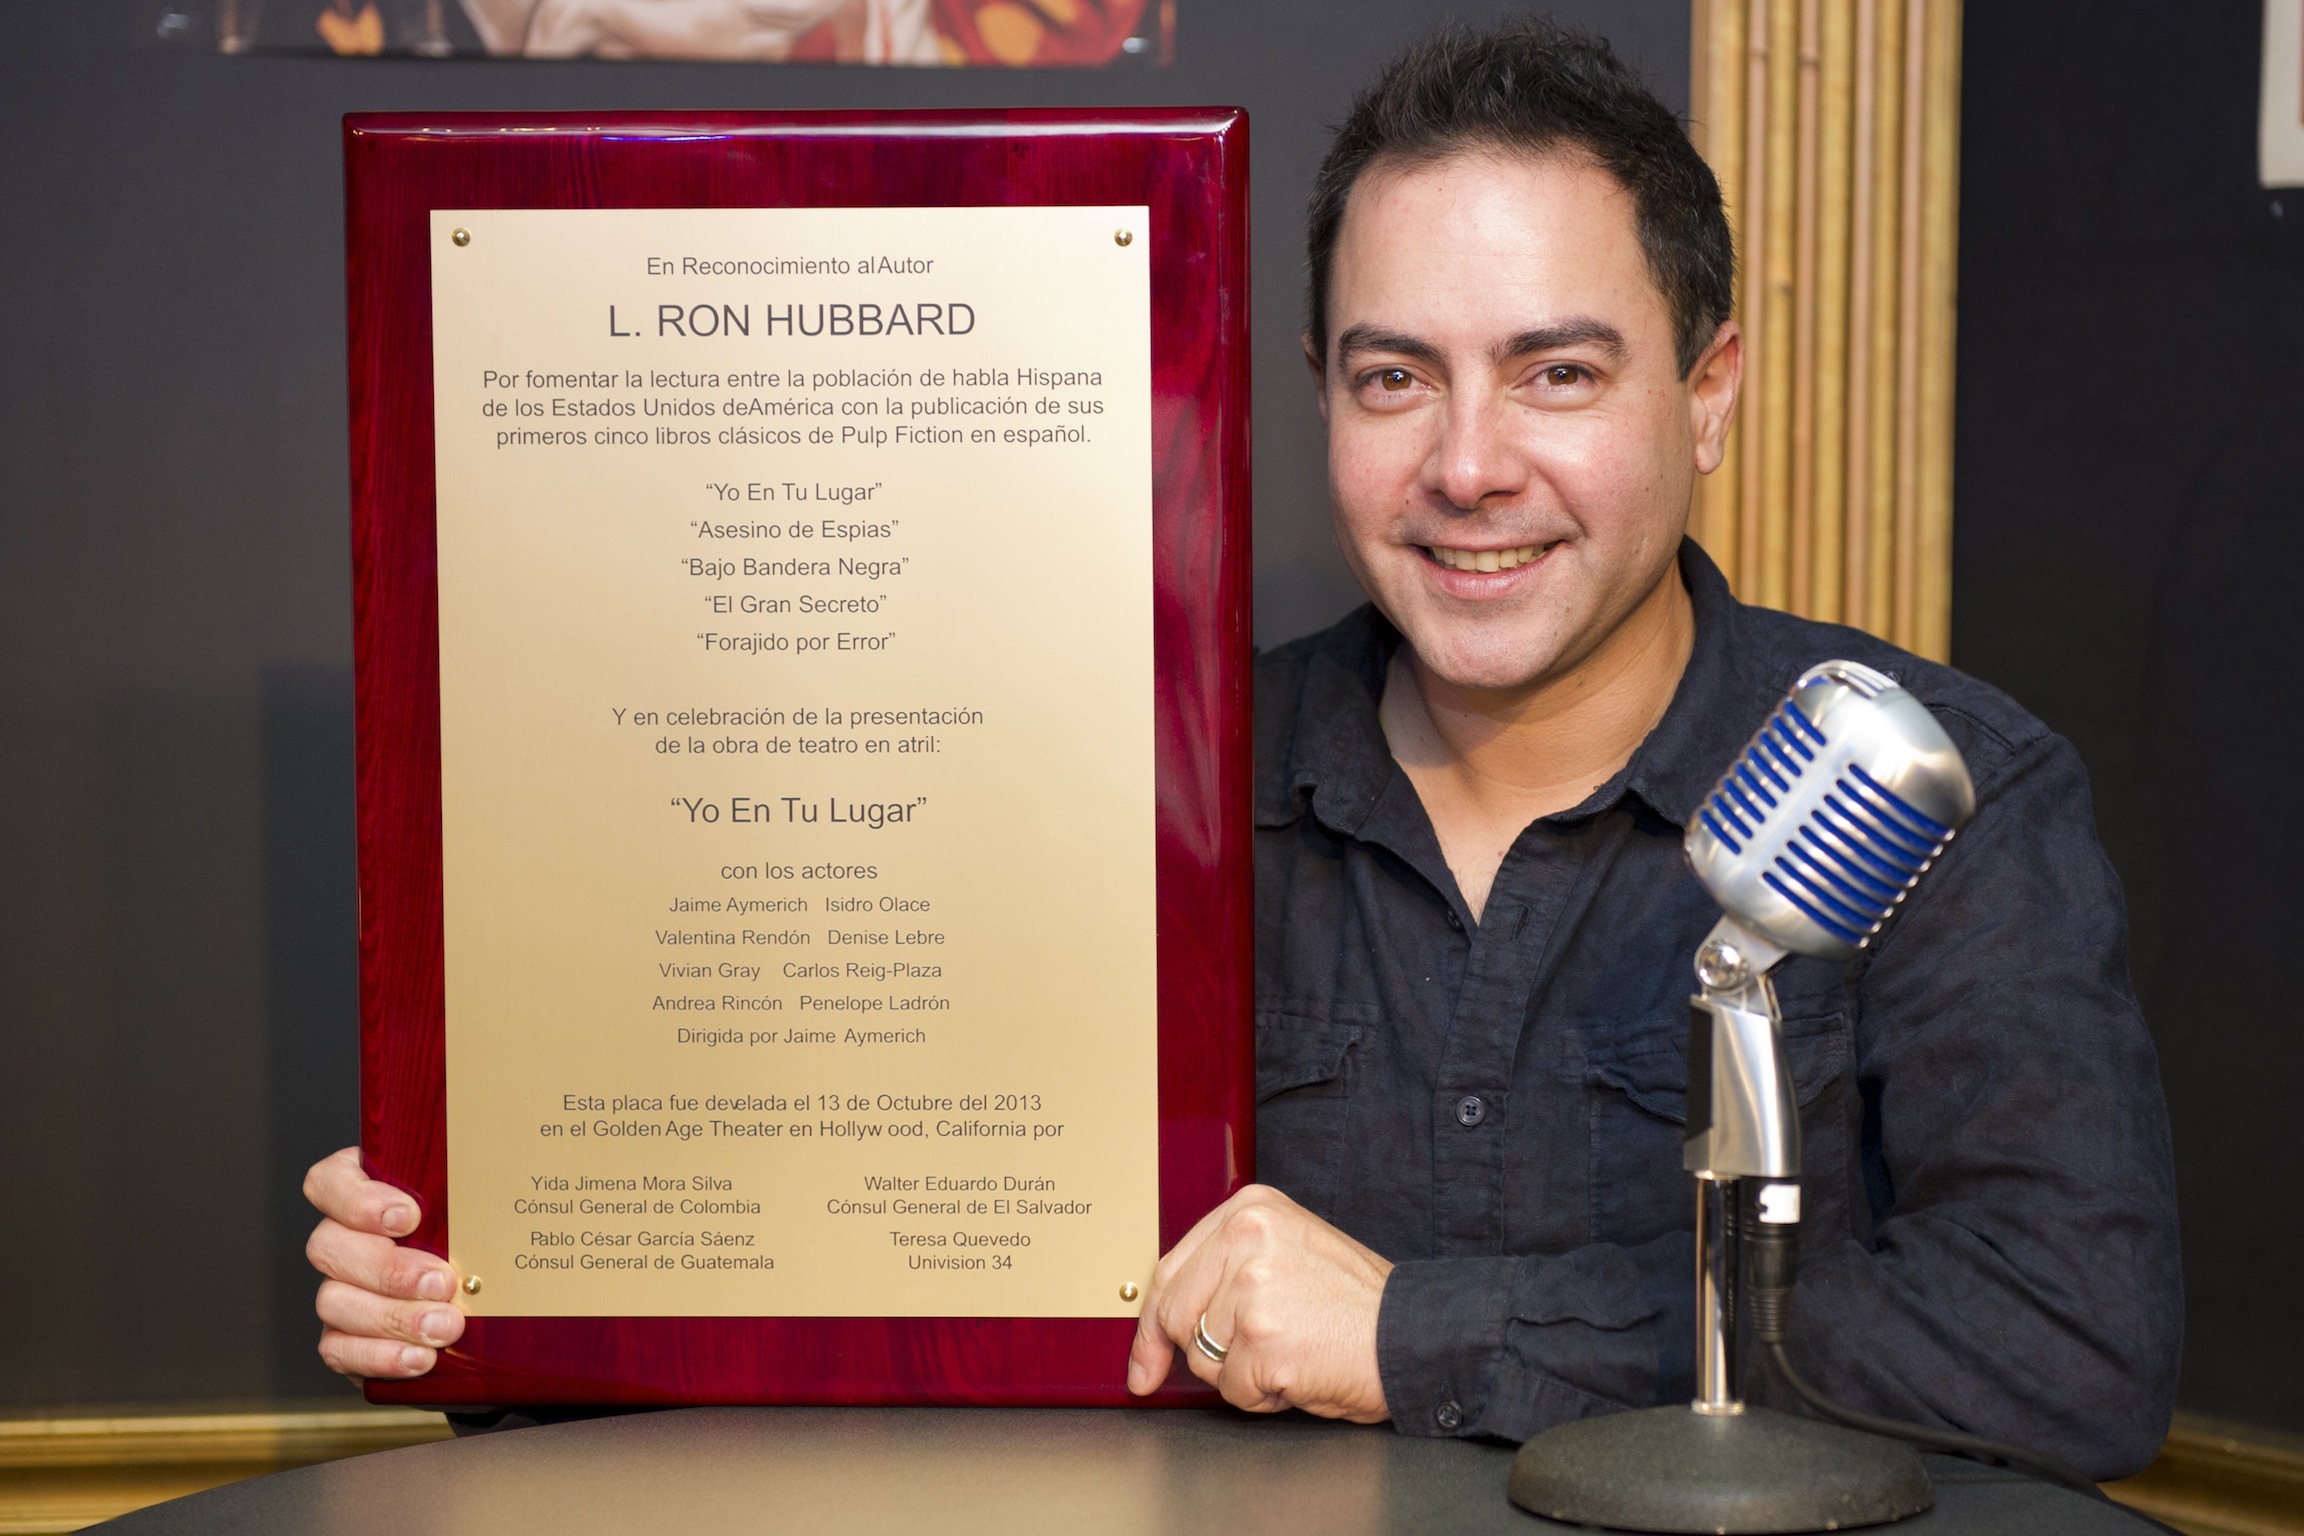 Director Jaime Aymerich with plaque presented to L. Ron Hubbard and actors for superb performance of “If I Were You.”